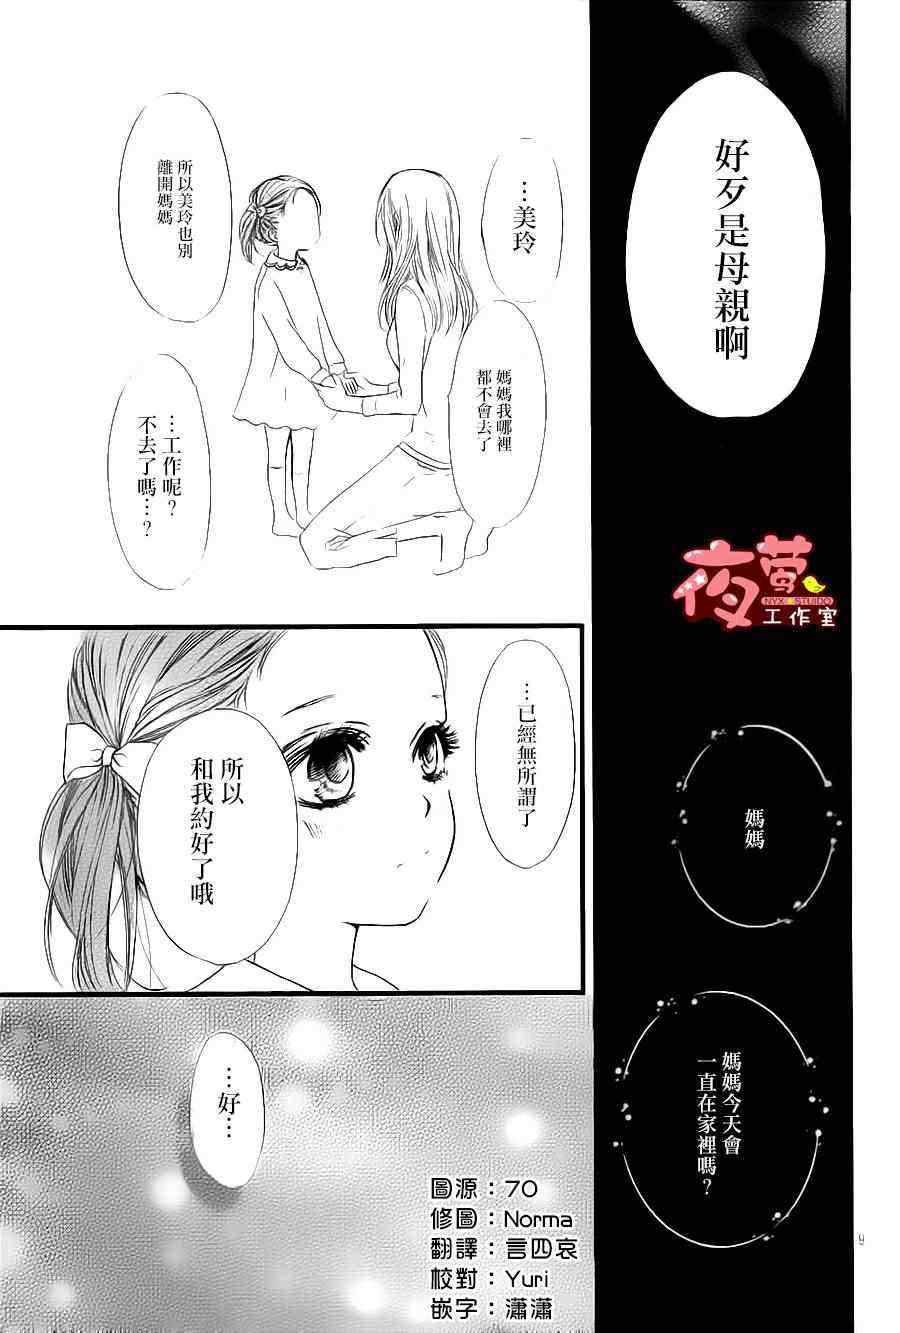 I love you baby - 第27話 - 3